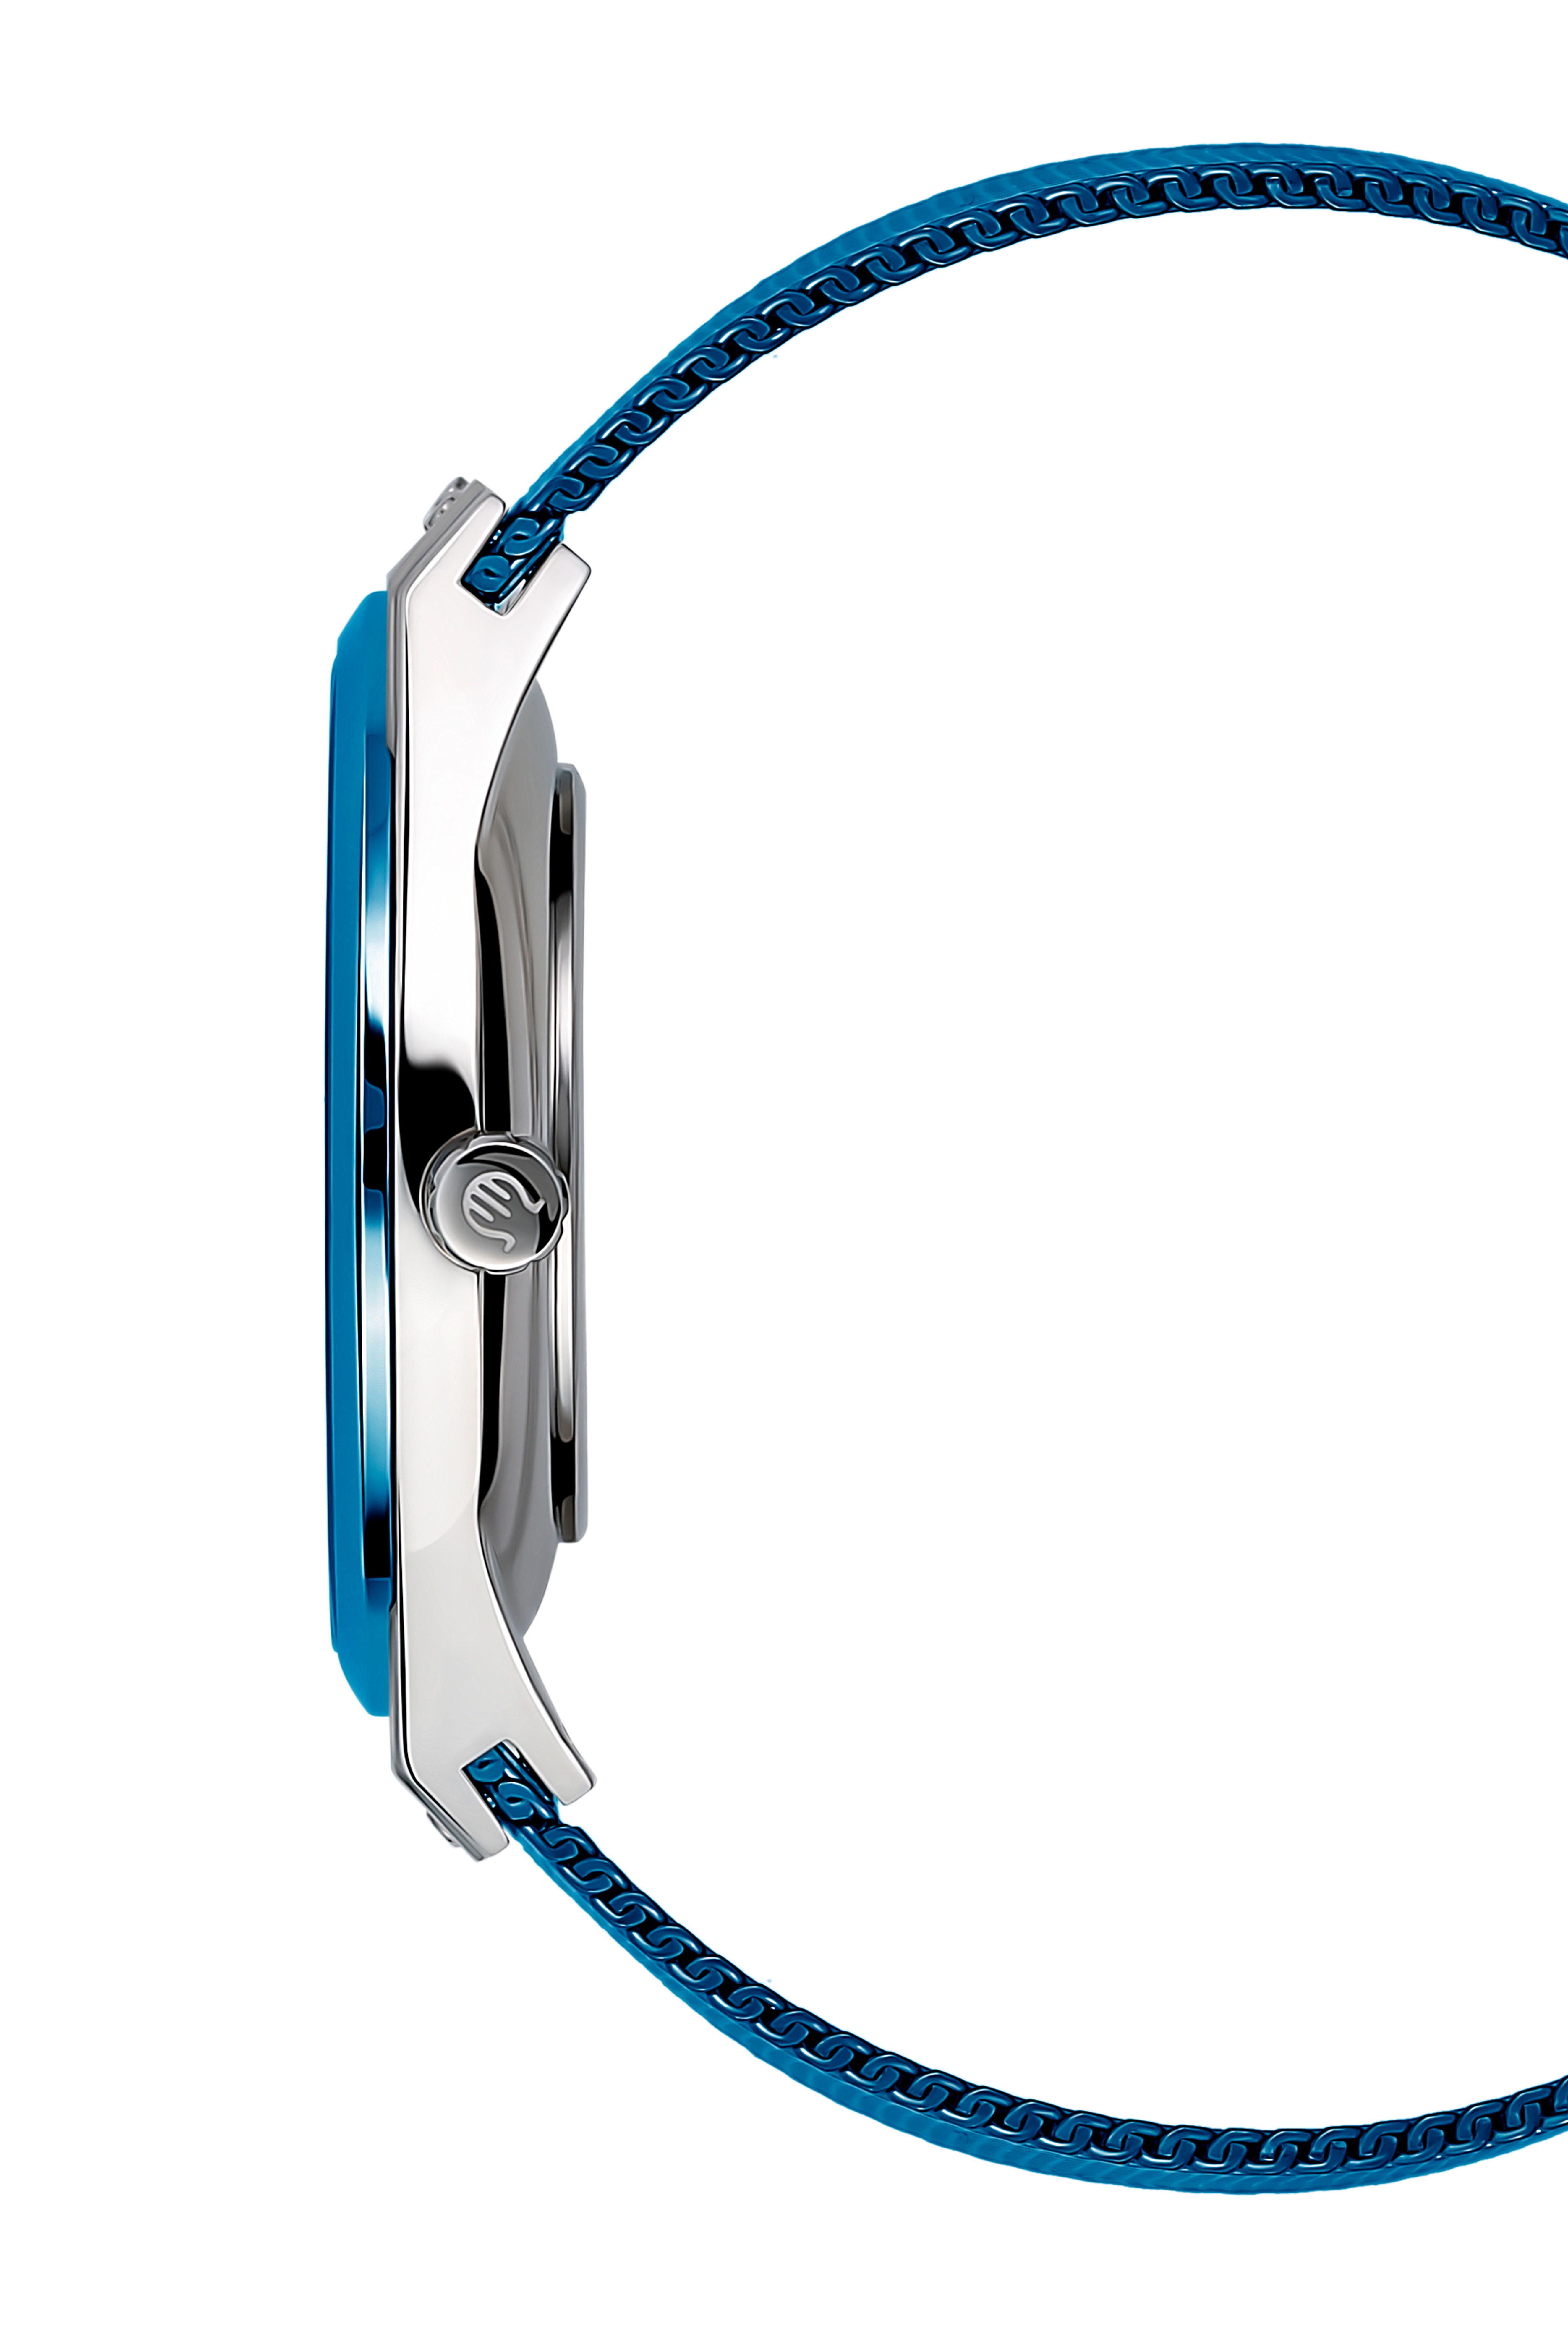 This Orphelia Saffiano Multi Dial Watch for Men is the perfect timepiece to wear or to gift. It's Silver 41 mm Round case combined with the comfortable Blue Stainless steel watch band will ensure you enjoy this stunning timepiece without any compromise. Operated by a high quality Quartz movement and water resistant to 3 bars, your watch will keep ticking. GREAT DESIGN: ORPHELIA Saffiano Multi dial  watch with a Miyota Quartz movement includes a date display and has a mesh band. This watch features a 24 hour display. Perfect for parties, date nights and wearing in the office. PREMIUM QUALITY: By using high-quality materials  Glass: Mineral Glass  Case material: Stainless steel  Bracelet material: Stainless steel- Water resistant: 3 bars COMPACT SIZE: Case diameter: 41 mm  Height: 9 mm  Strap- Length: 22 cm  Width: 20 mm. Due to this practical handy size  the watch is absolutely for everyday use-Weight: 92 g